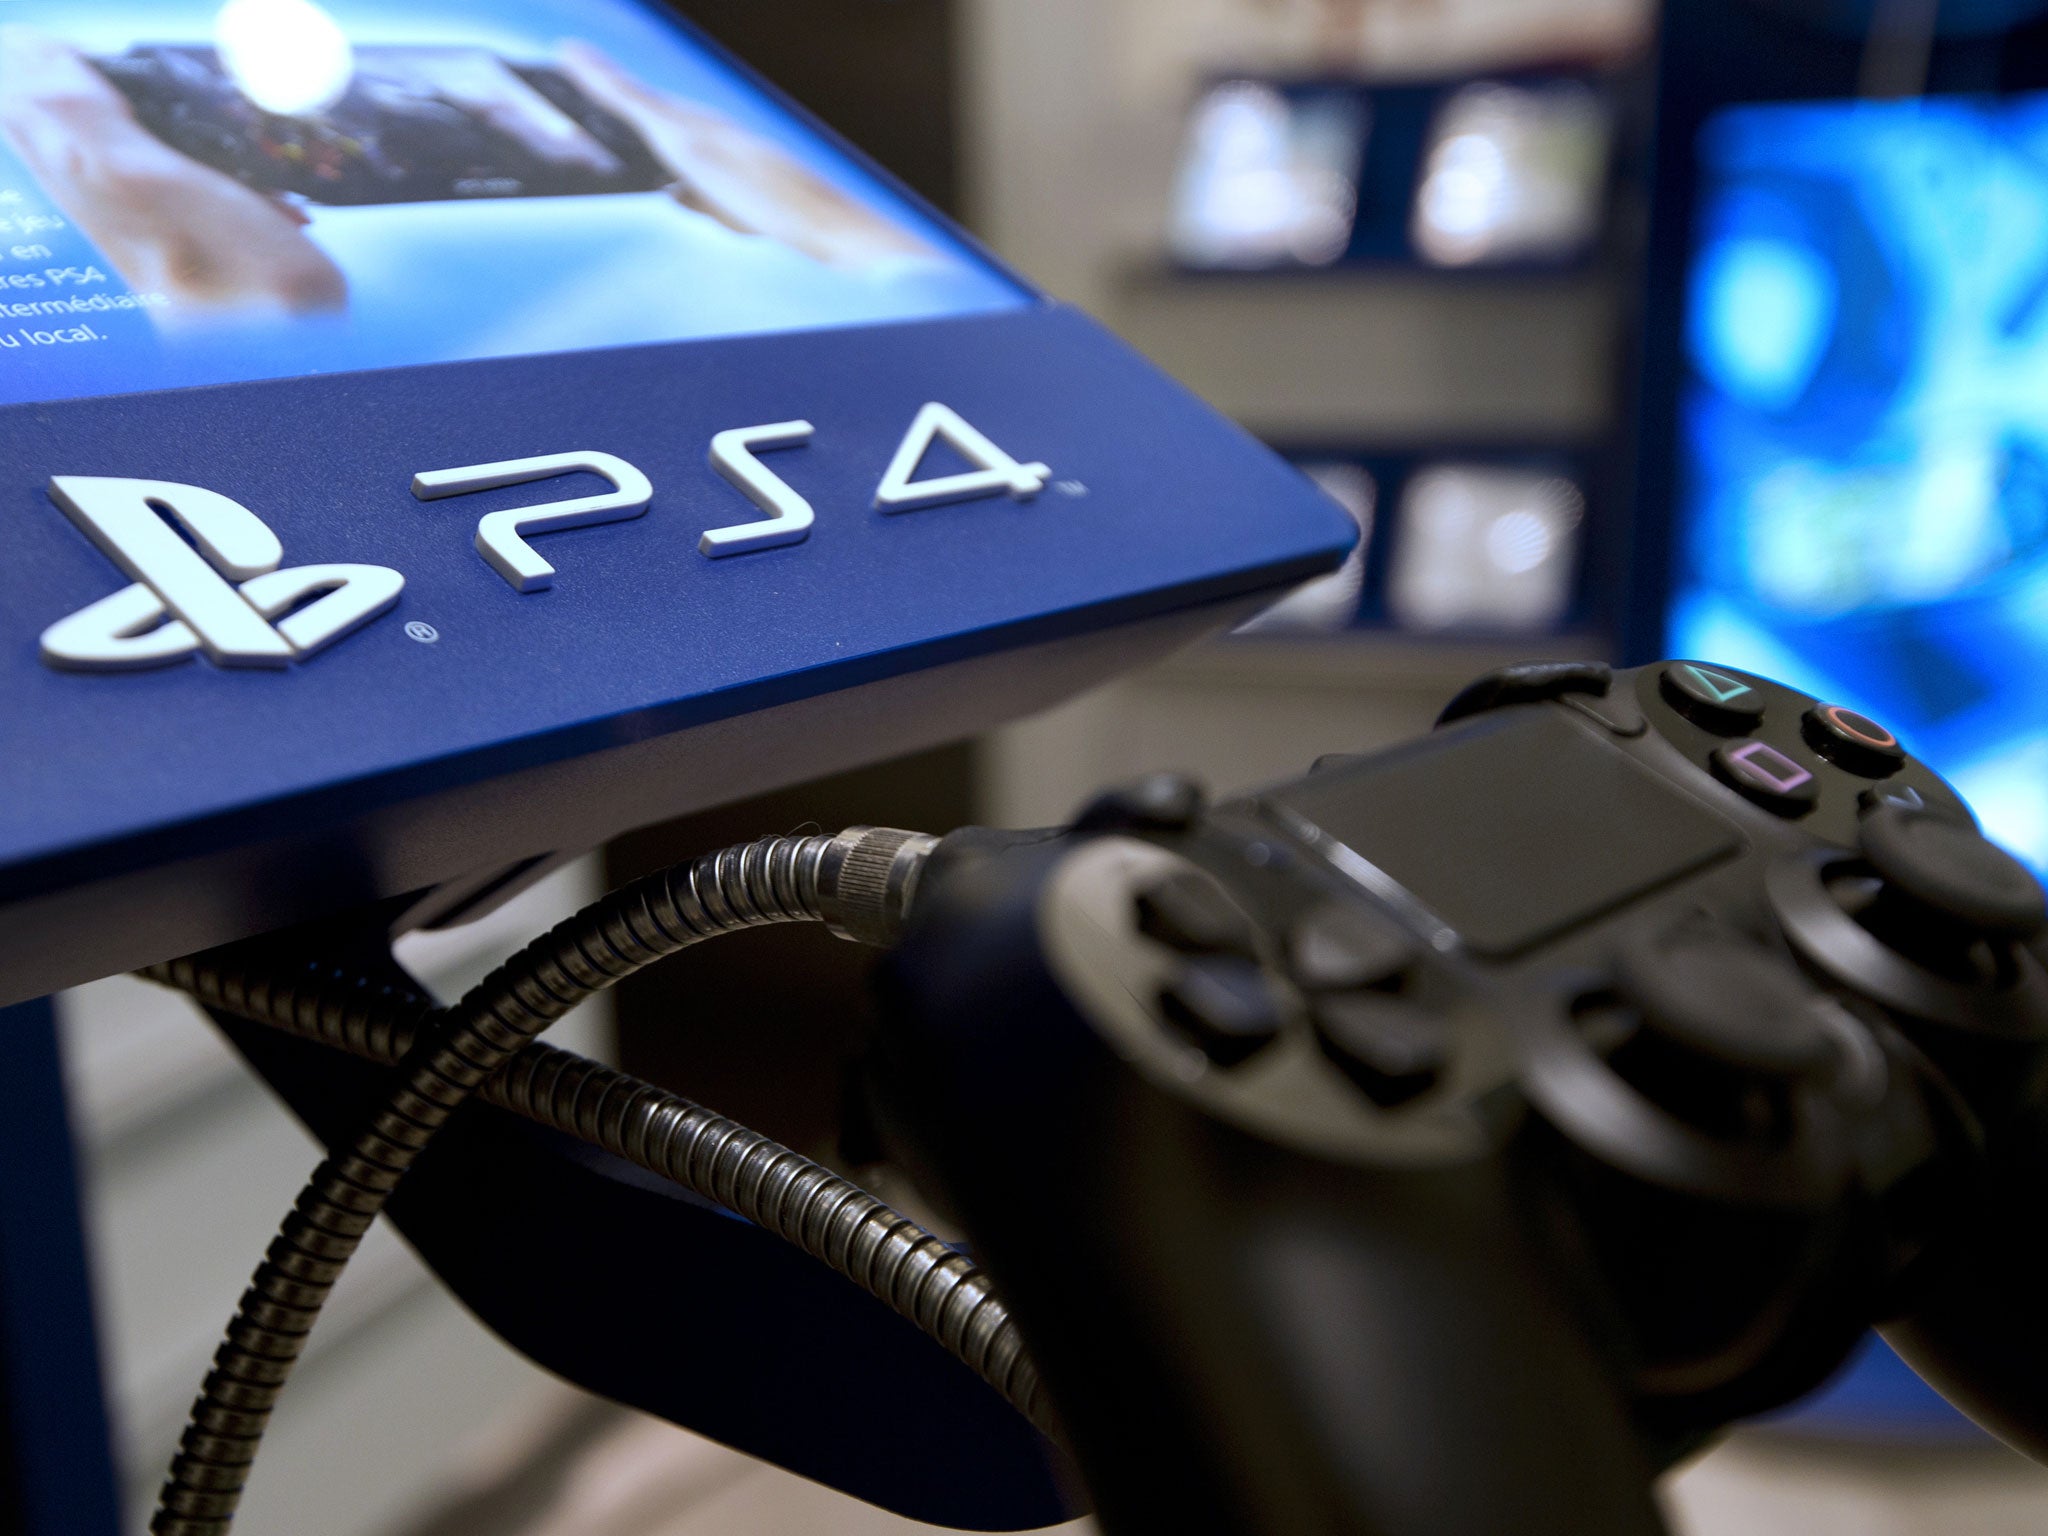 A picture taken on November 29, 2013 in a Parisian store shows the joystick of the new Sony Playstation 4 video game console (PS4).